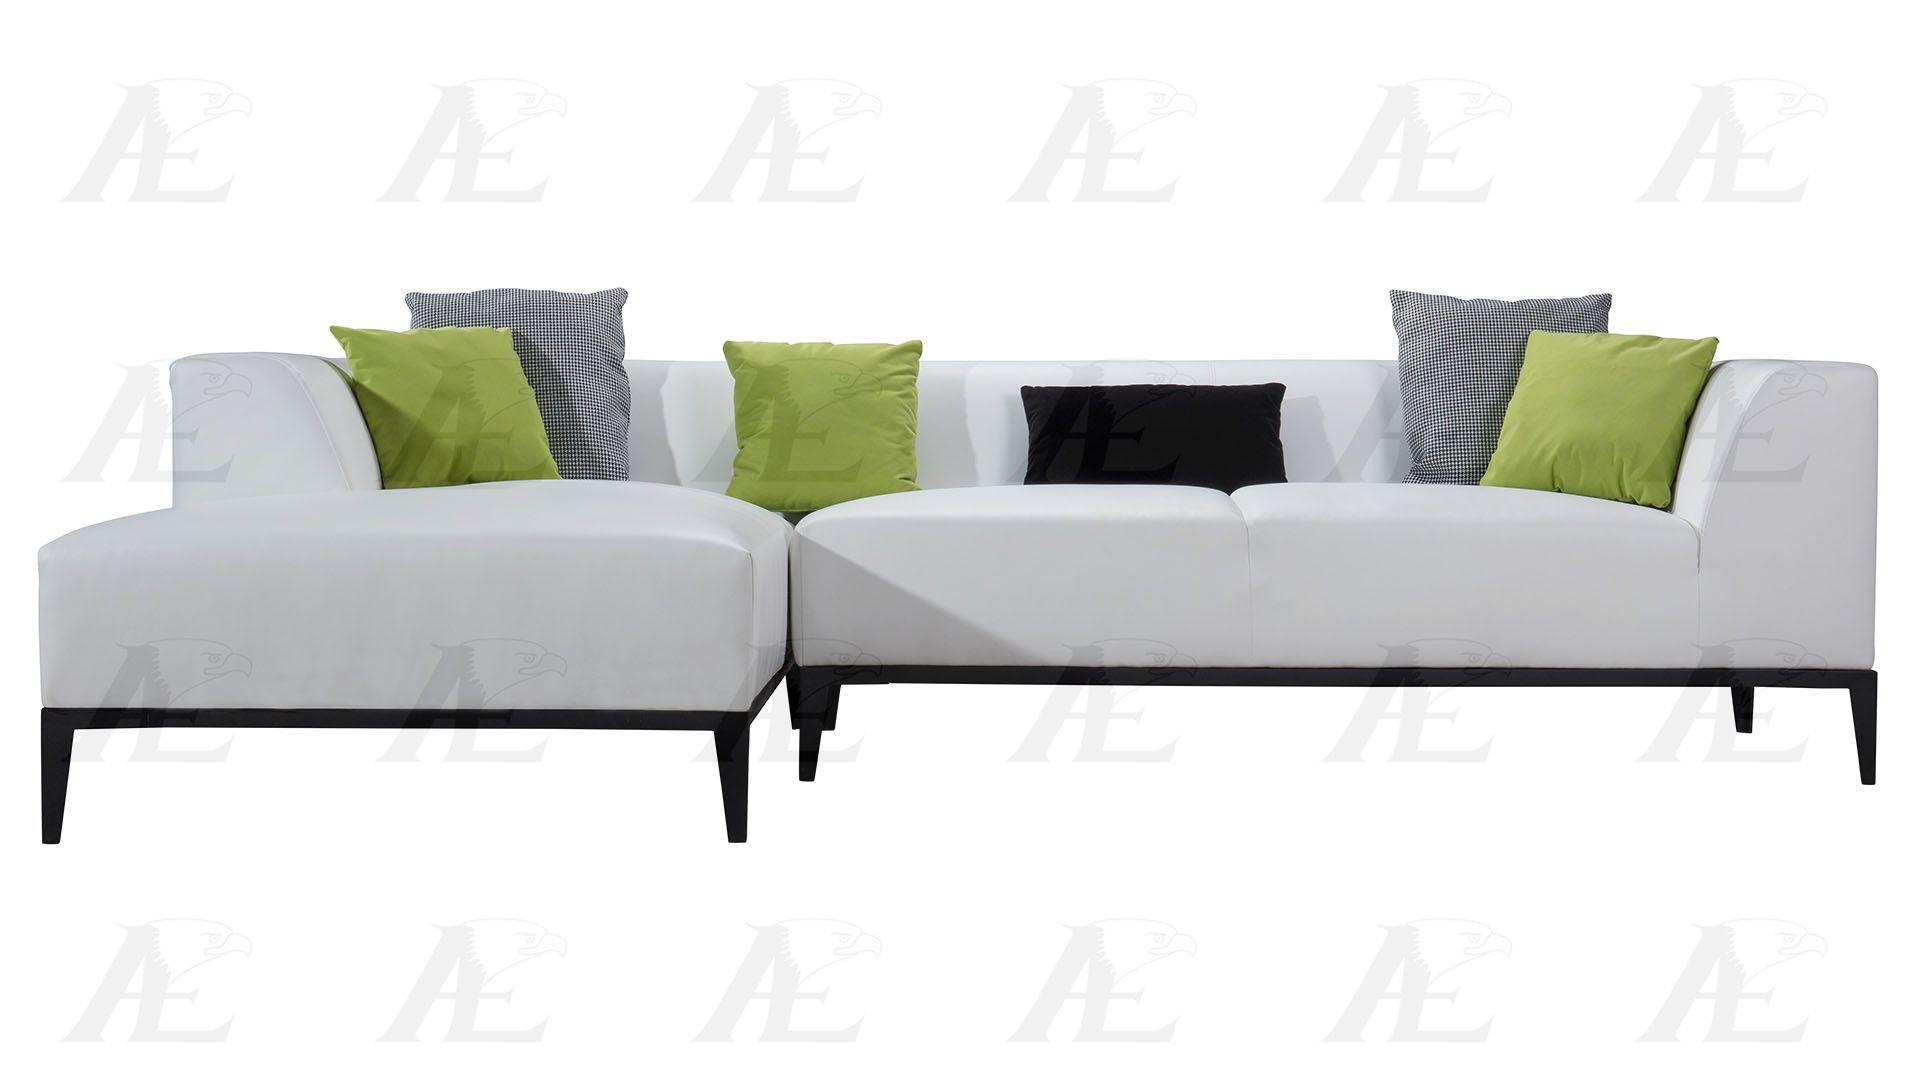 

    
American Eagle Furniture AE-LD818-W Sofas and Chaise White AE-LD818-W Set-3 LHC
